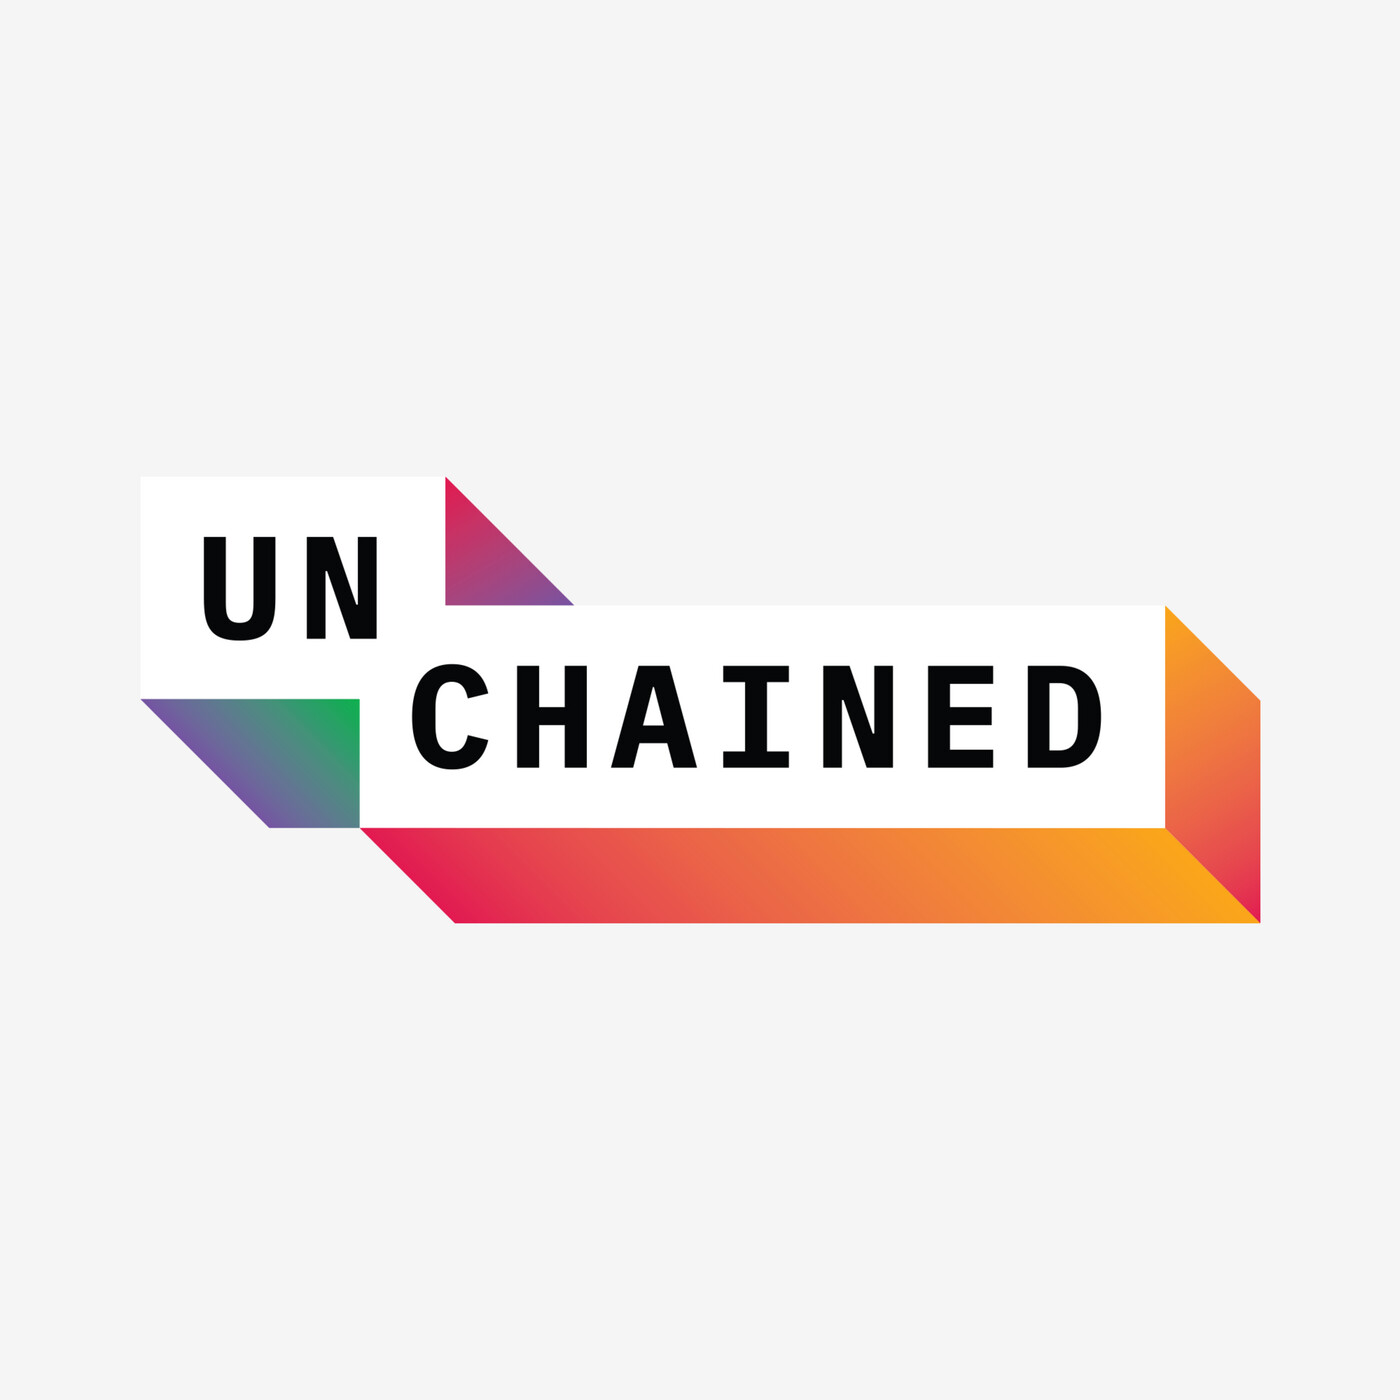 UNCHAINED: The US vs. Crypto| Jake Chervinsky on Crypto's Legal and Regulatory Status